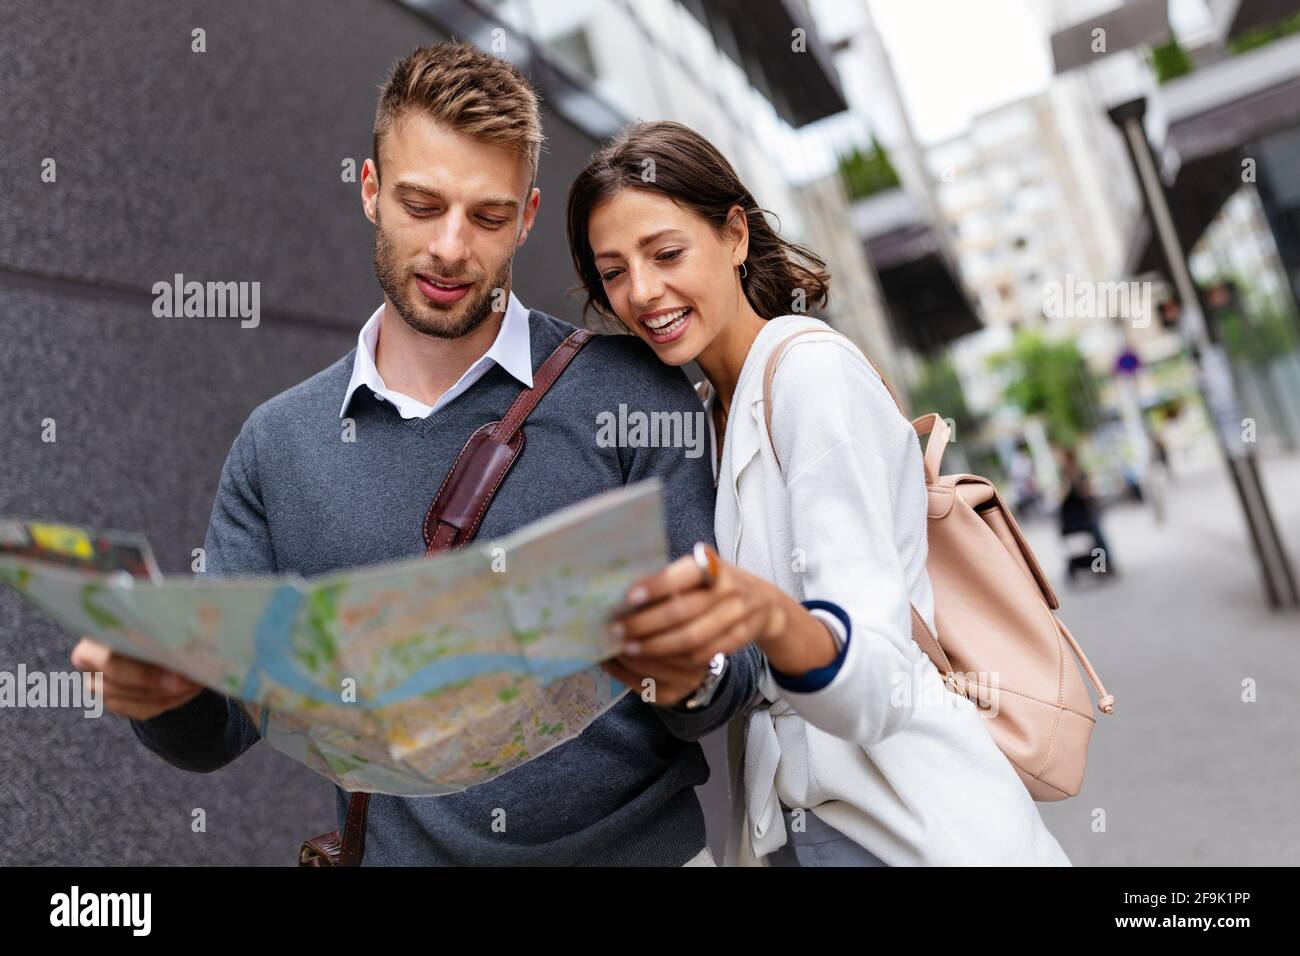 Happy young tourist couple walking street on vacation together Stock Photo